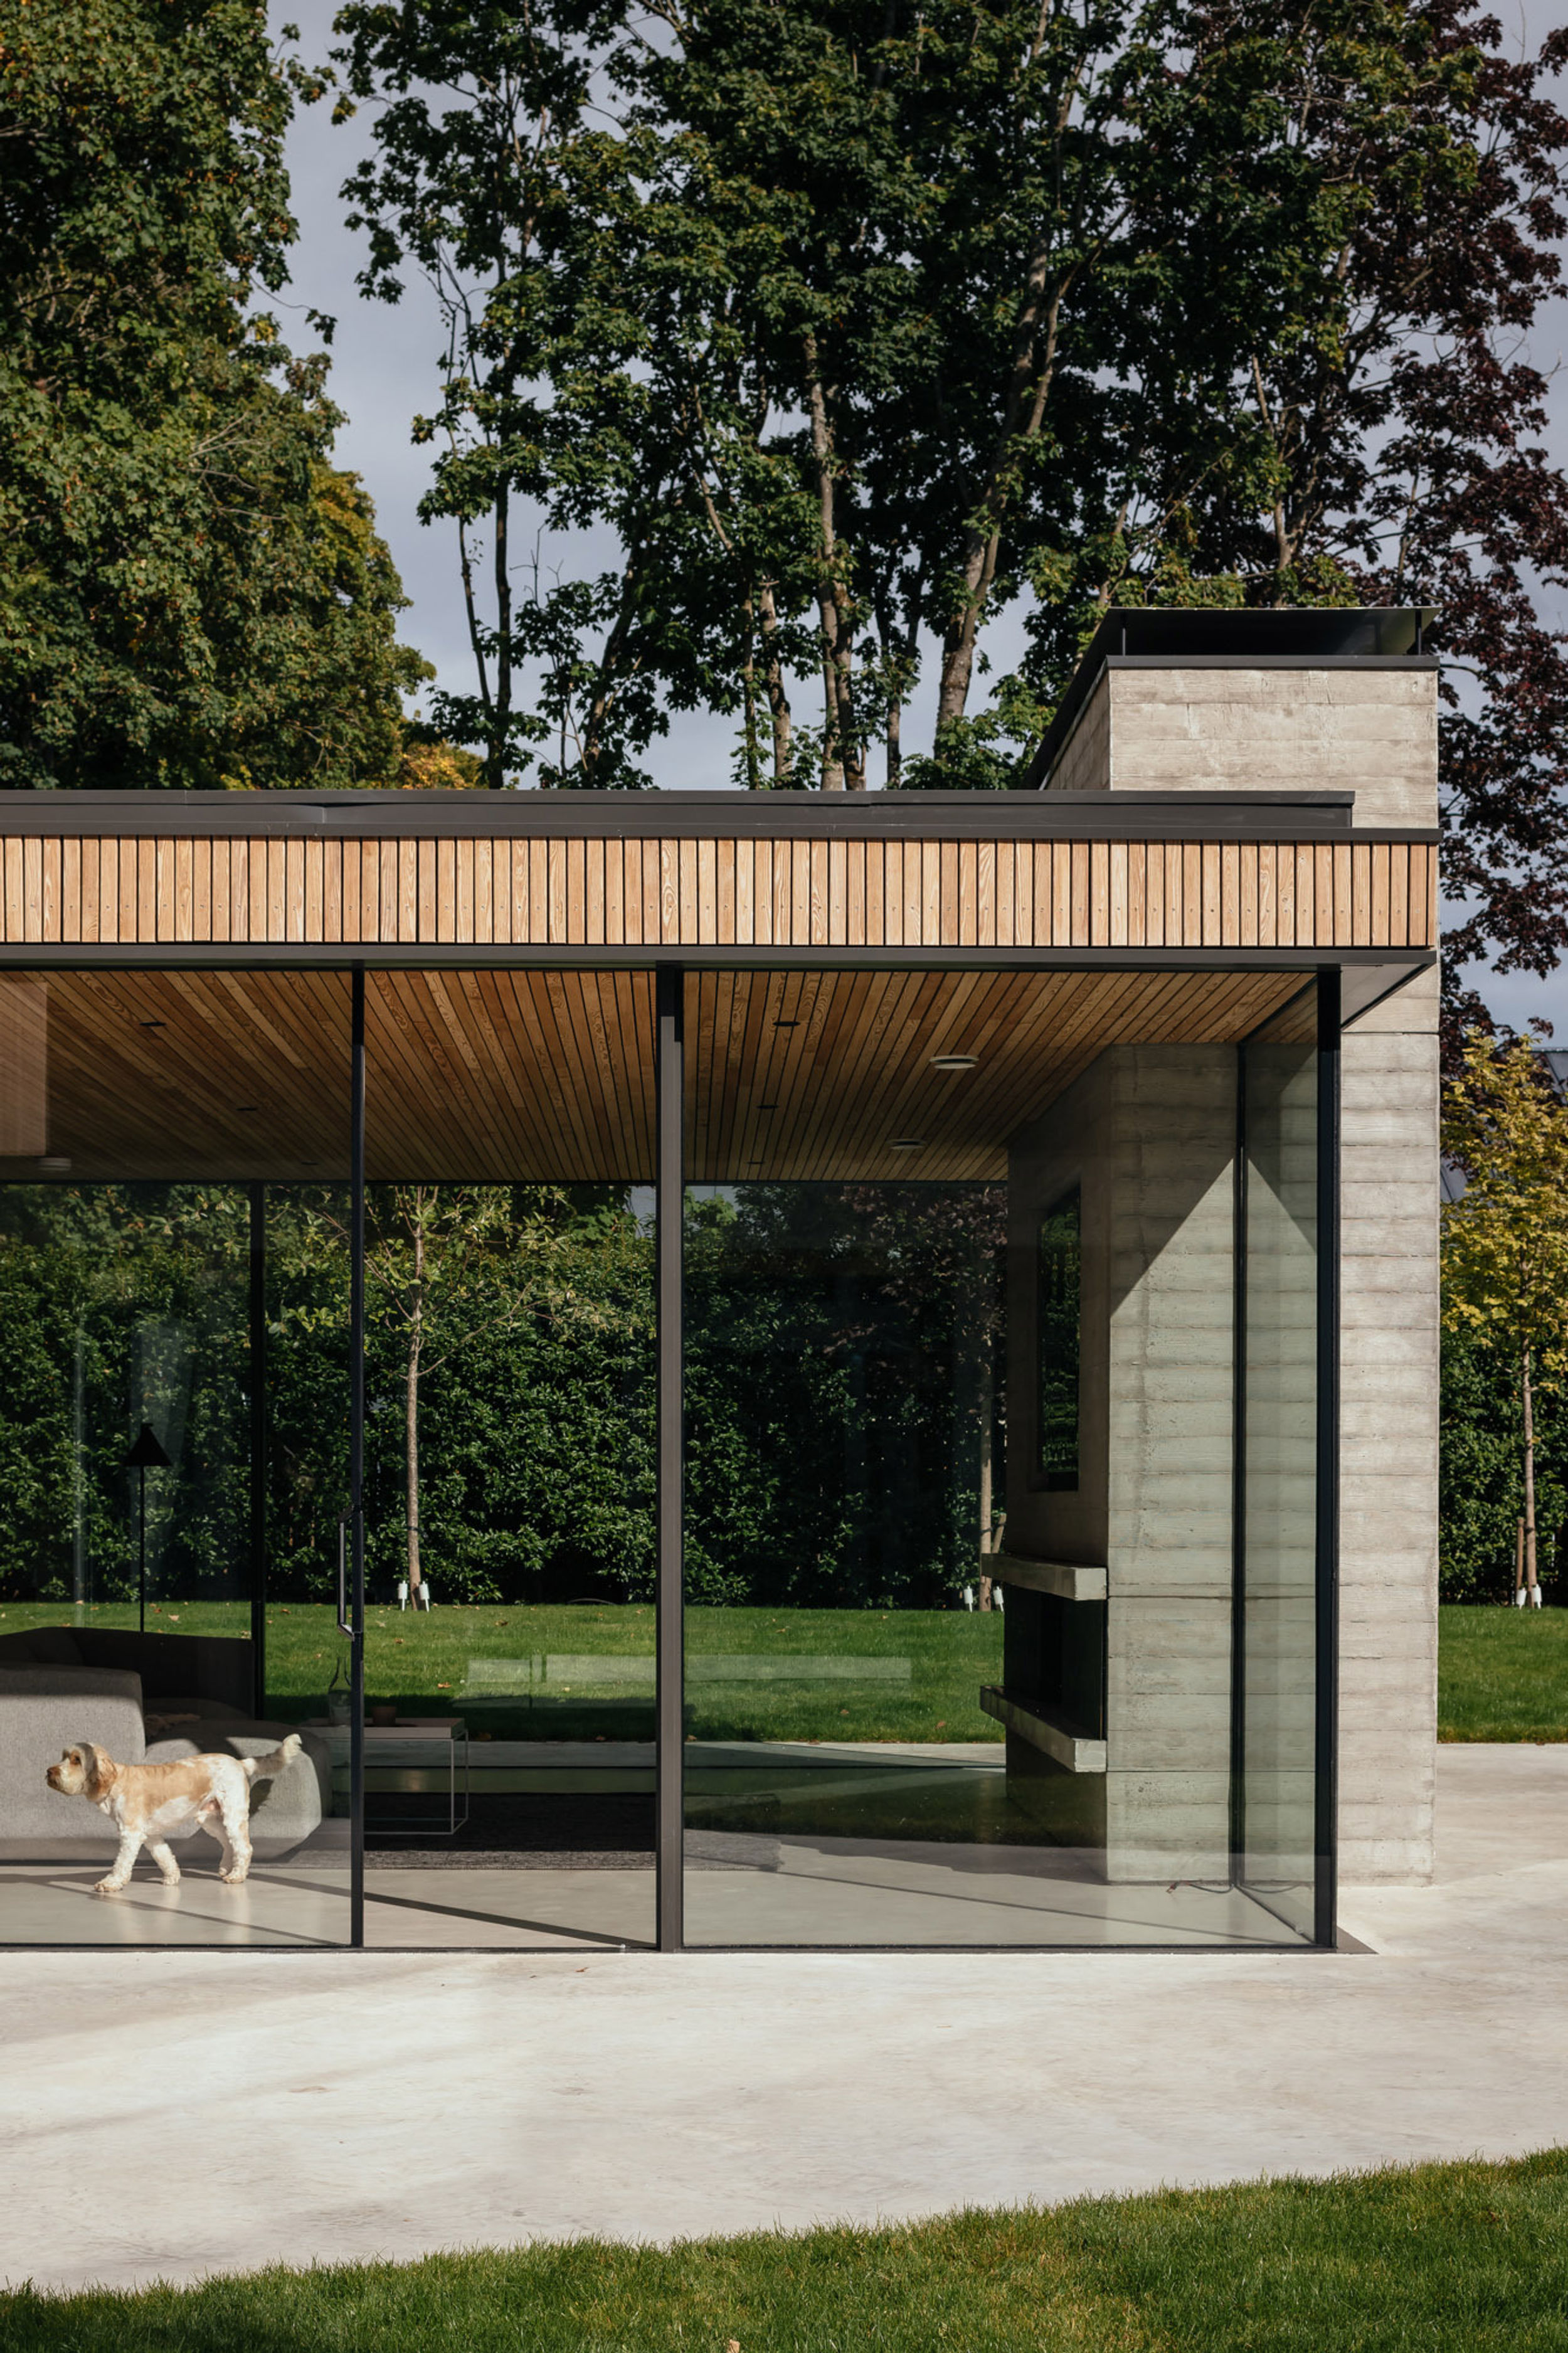 A dog walks inside a heavily glazed house looking outside. The walls are all made from glass. Inside, a fireplace is visible. The fireplace surround and chimney are made from board marked concrete. The ceiling is timber lined. The internal floor is micro cement.